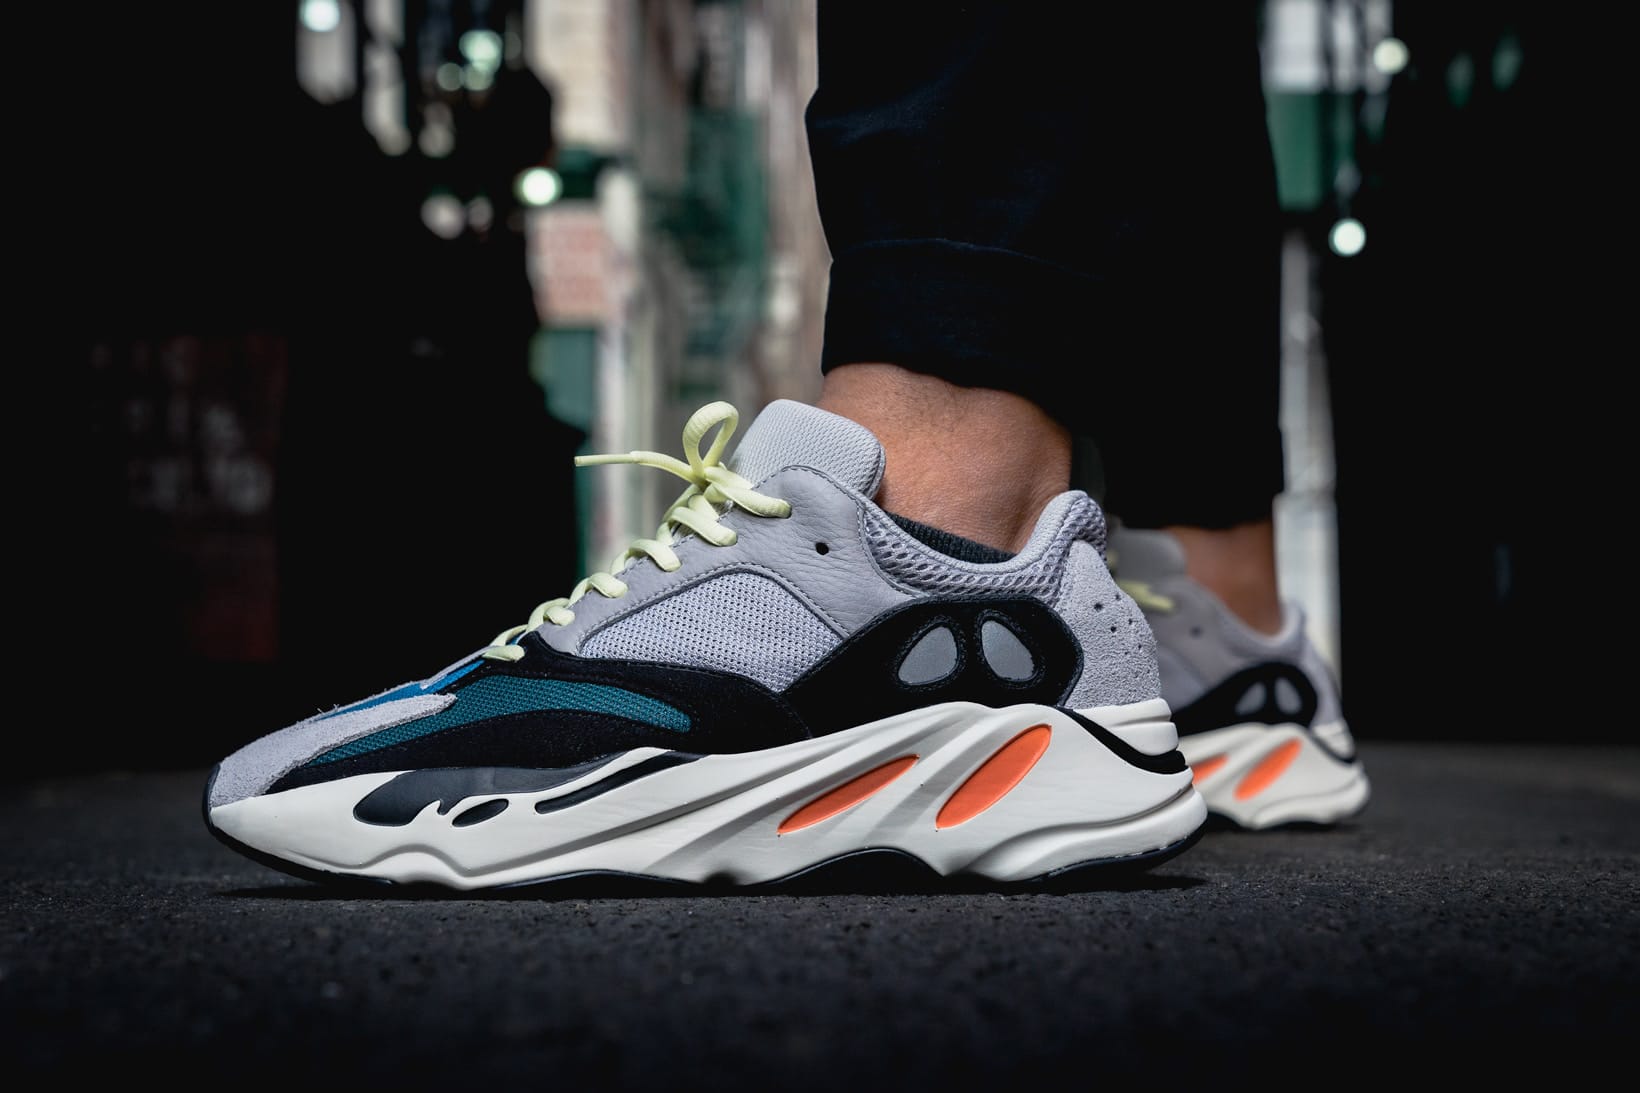 yeezy 700 wave runner resell